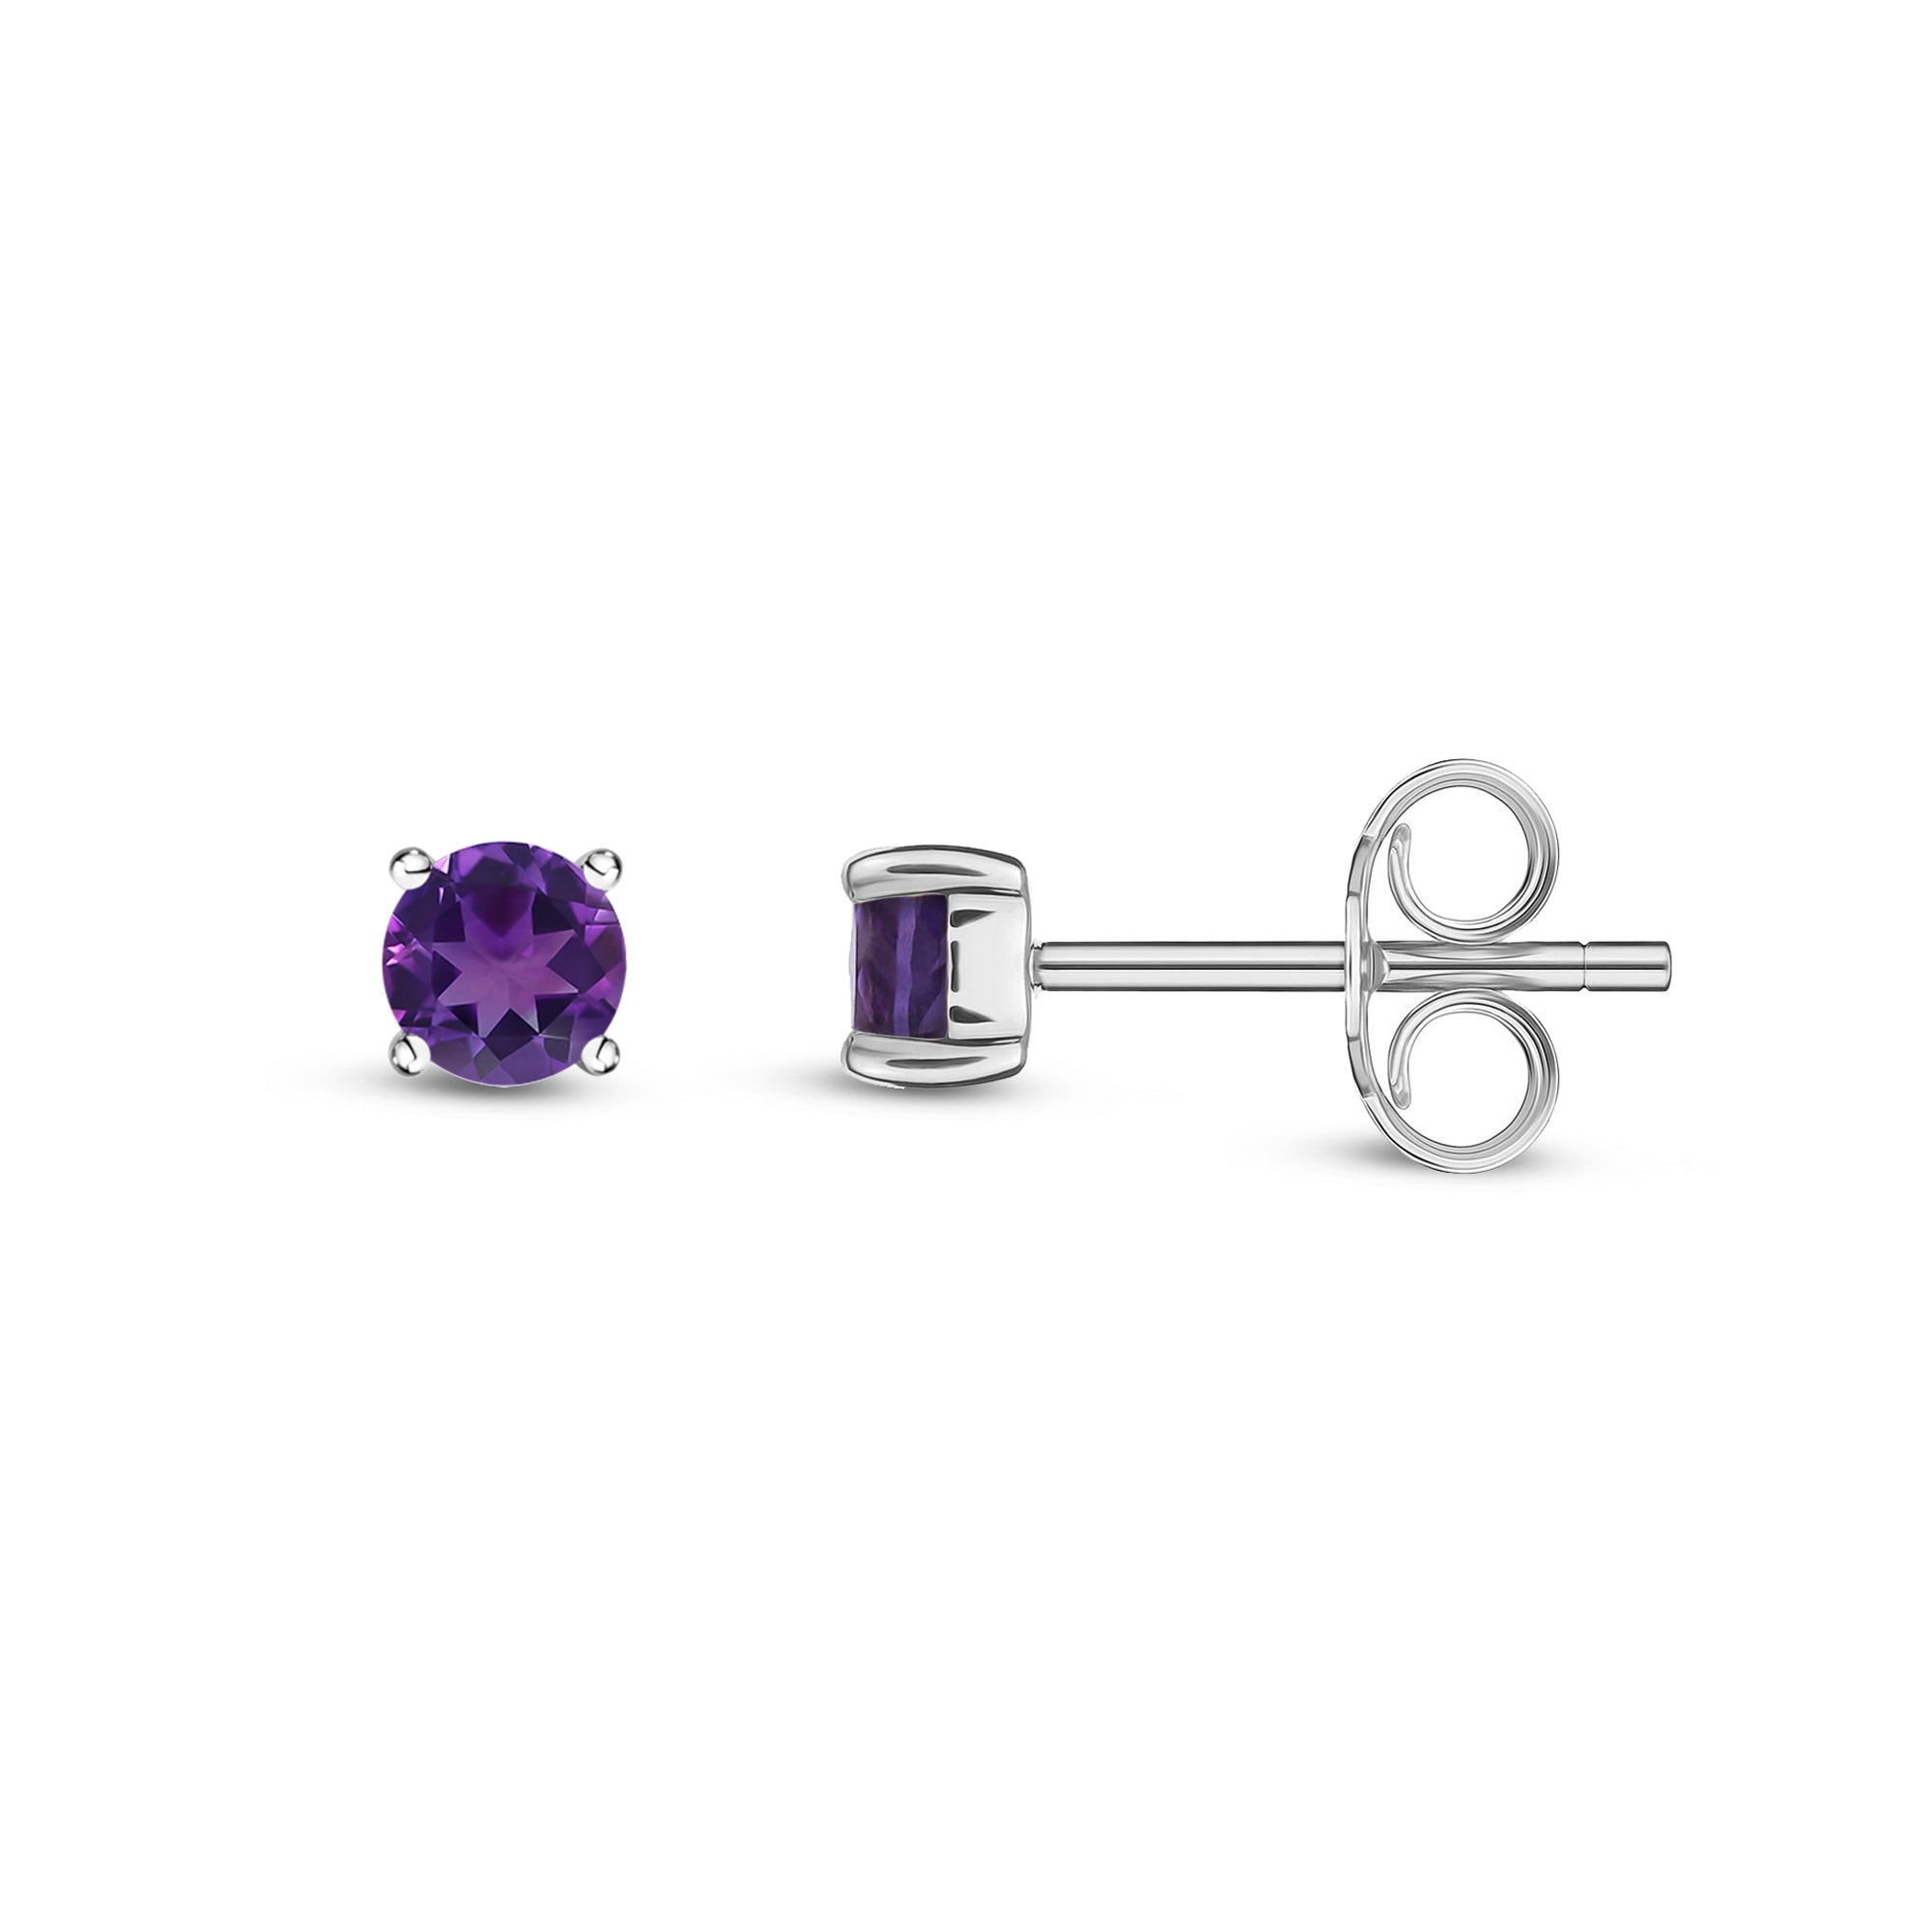 9ct White Gold 3mm 4 Claw Amethyst Stud Earrings 0.43ct